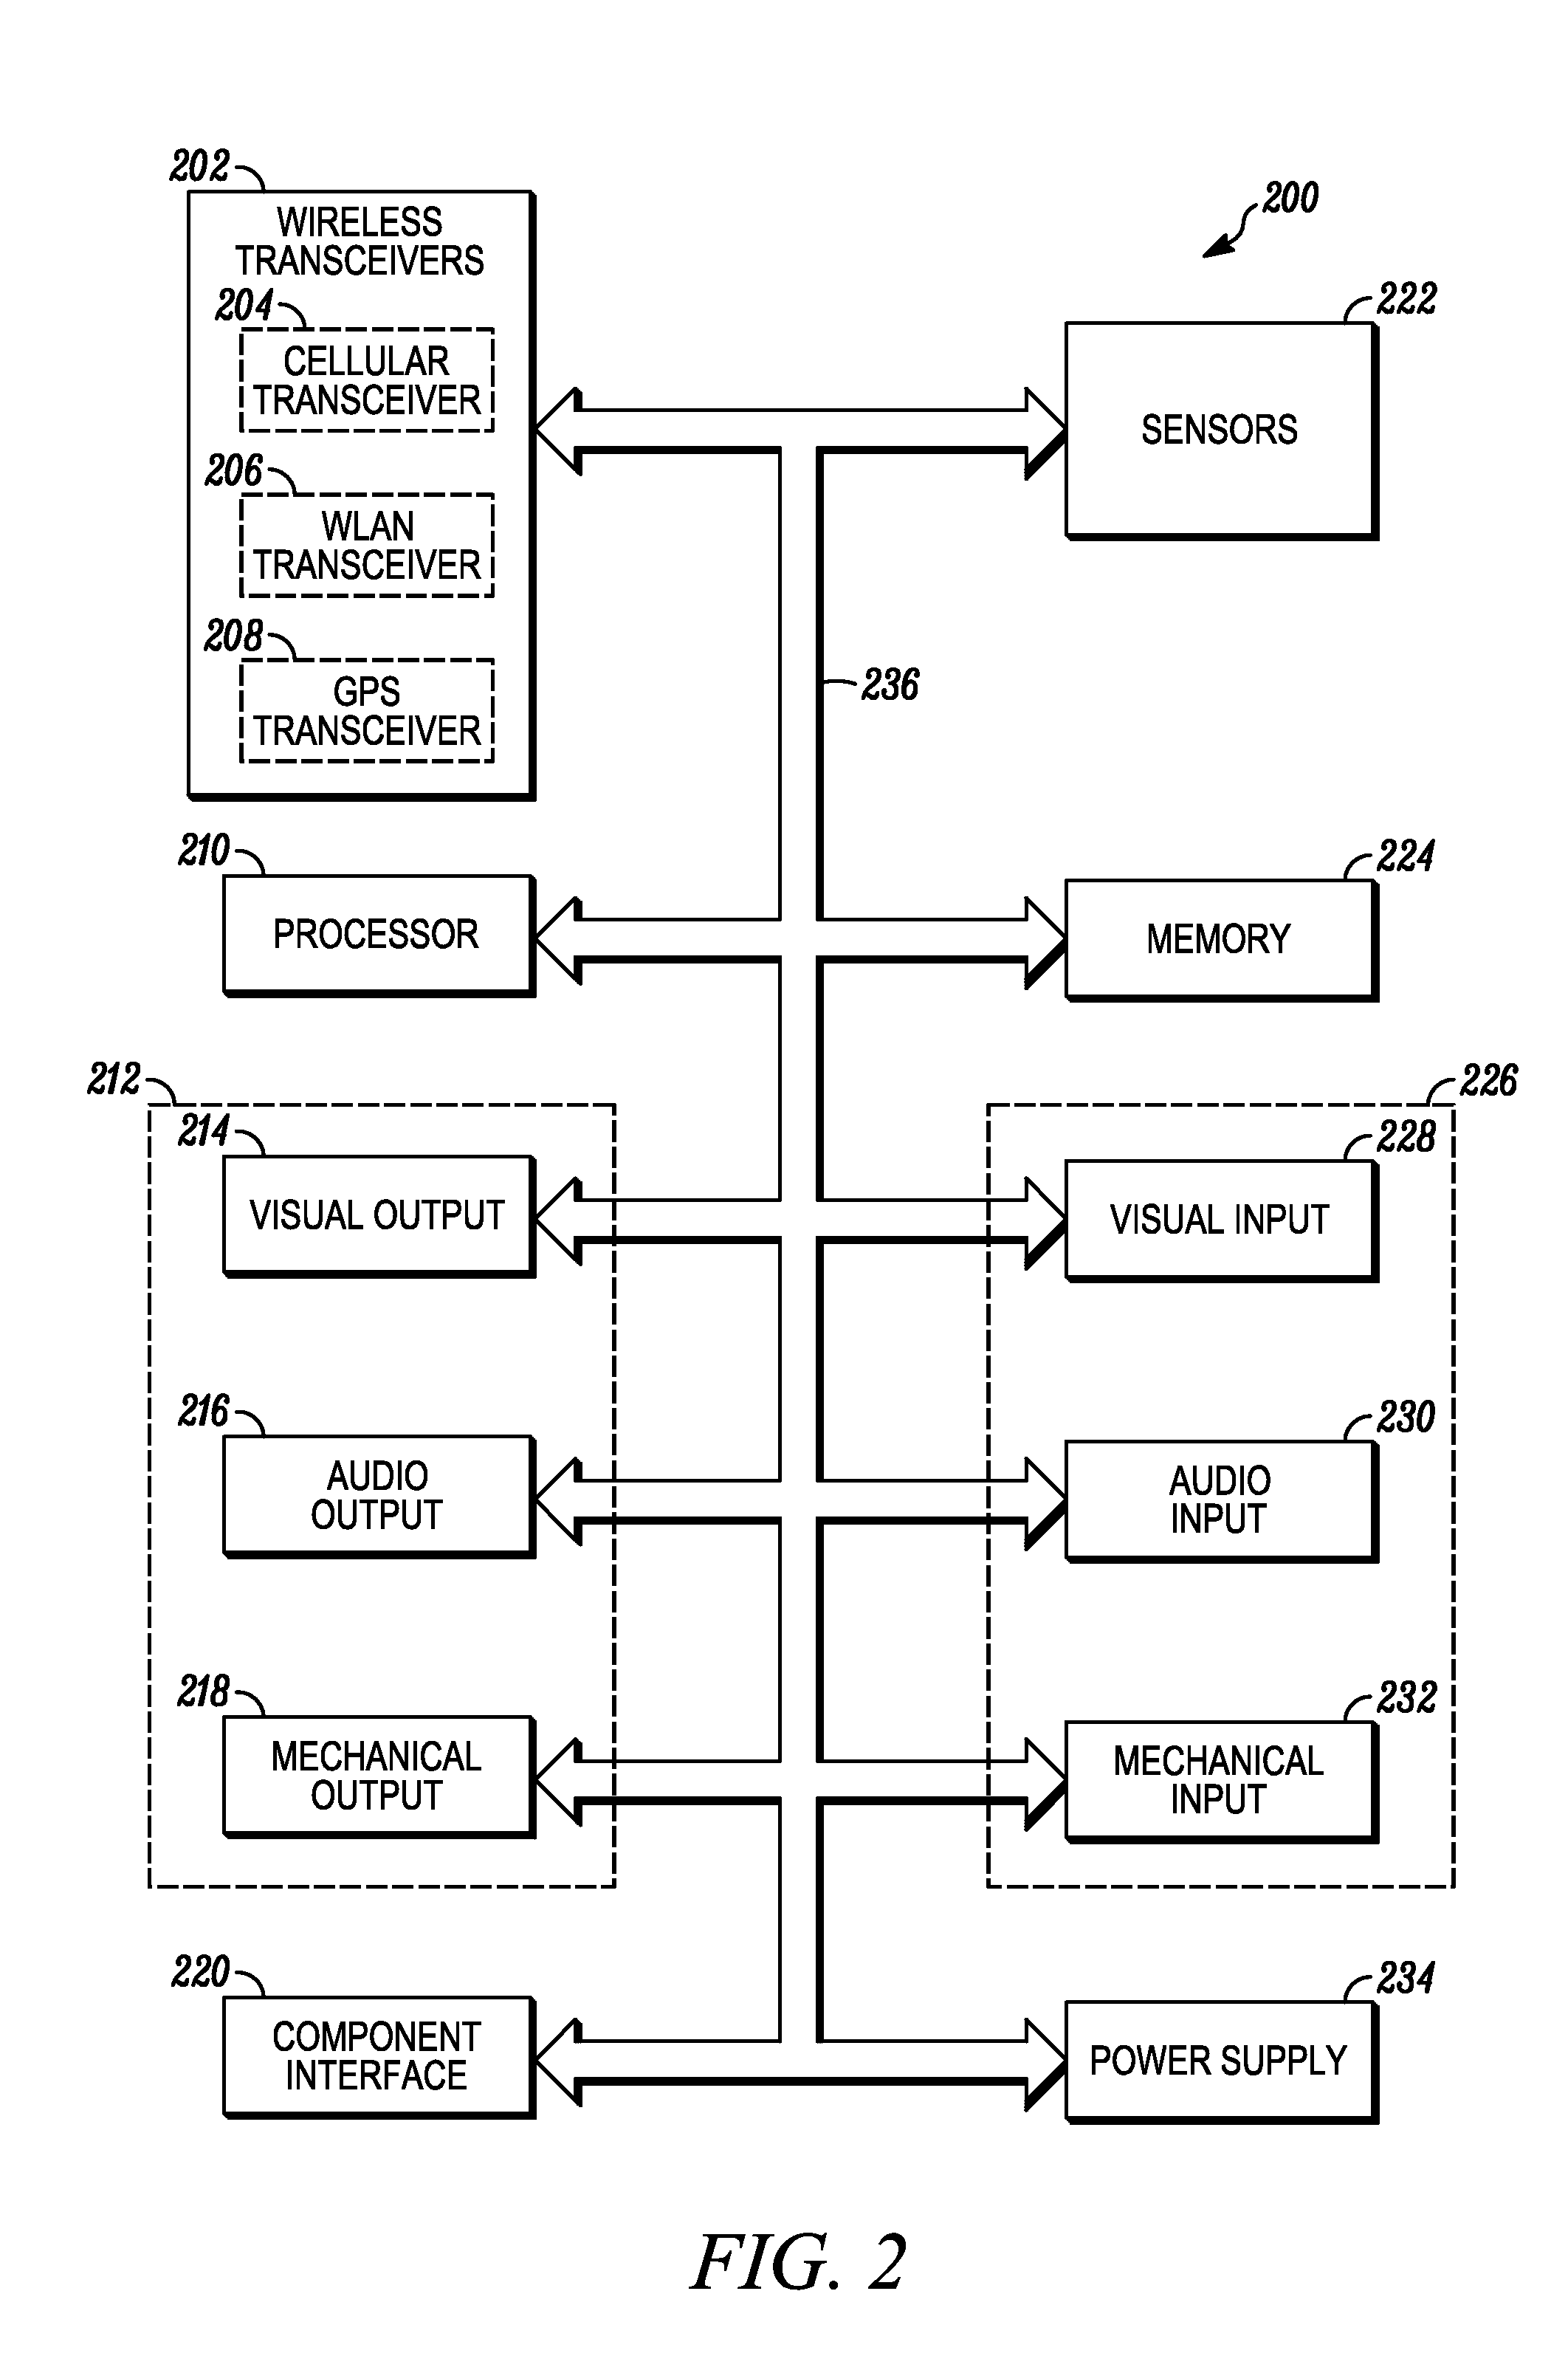 Method and device for policy-based routing